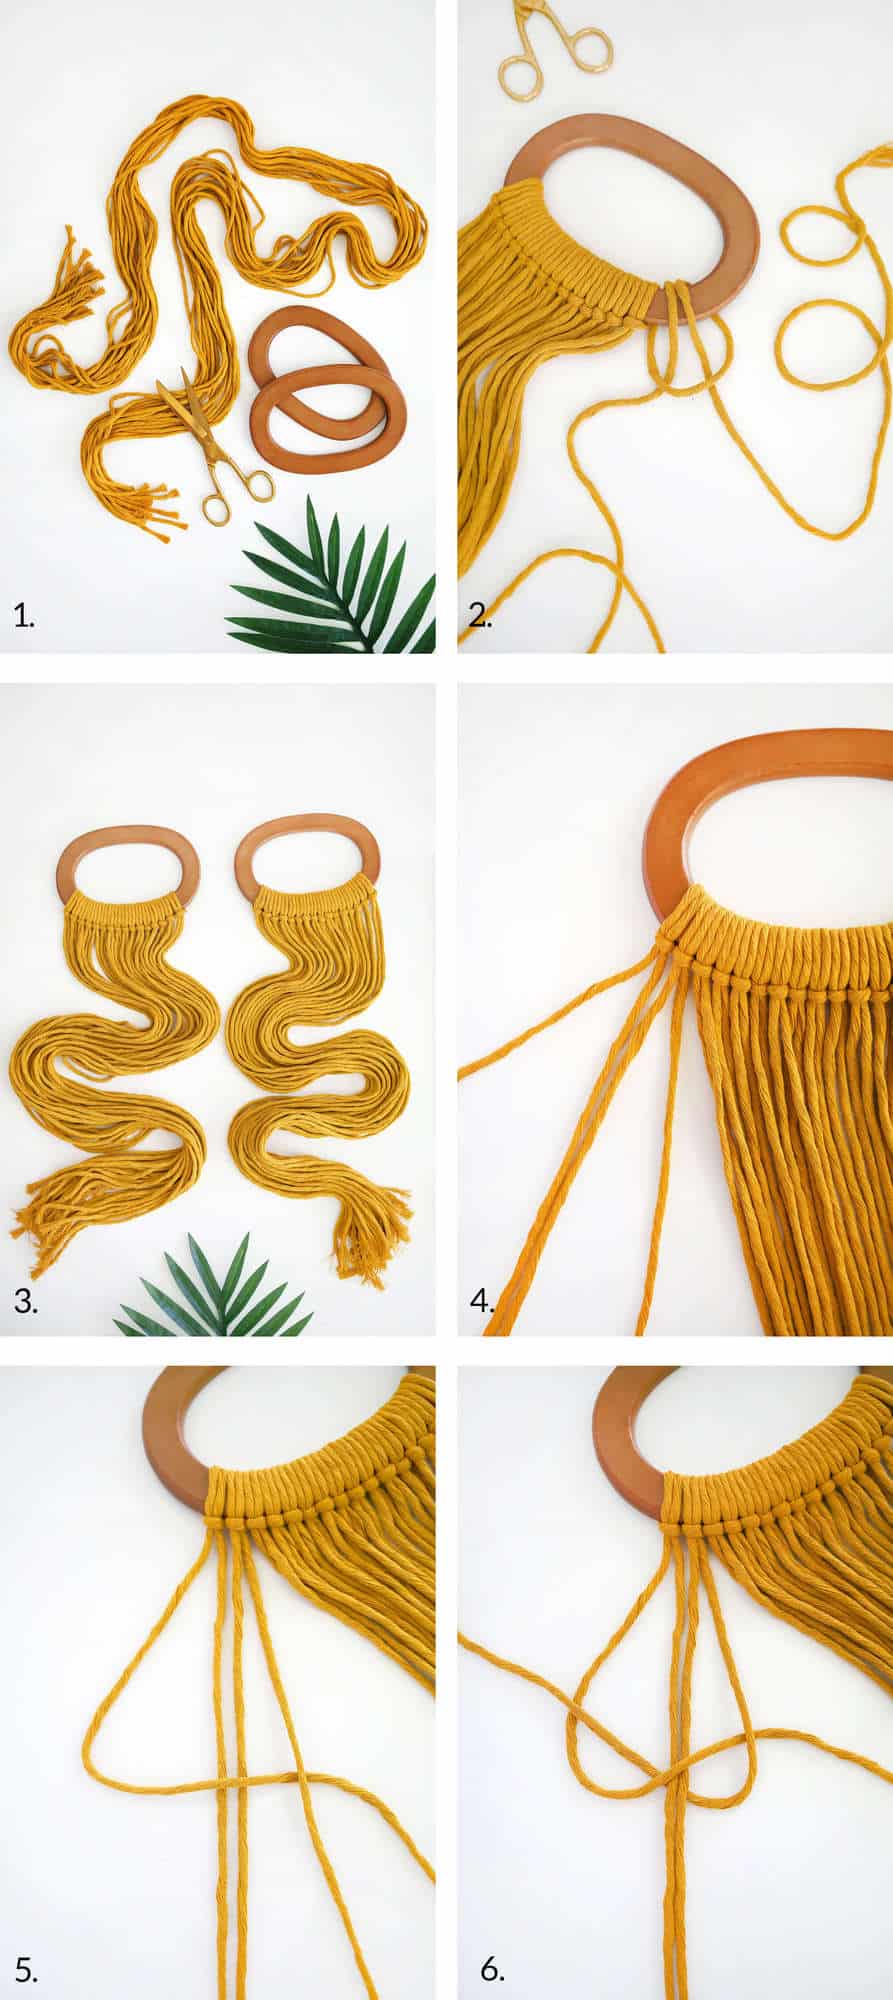 photo 1 - yellow cotton cord, gold scissors, and 2 wooden round shaped handles, photo 2 - yellow cotton cord tied around 1 of the wooden round shaped handles, photo 3- 2 wooden round shaped handles with yellow cotton cord tied around them, photo 4 - close up of yellow cotton cord tired around wooden round shaped handles, photo 5 - wooden round shaped handle with yellow cotton cord tied on it and 4 strings pulled away from it, photo 6 - yellow cotton cord strings being tied together